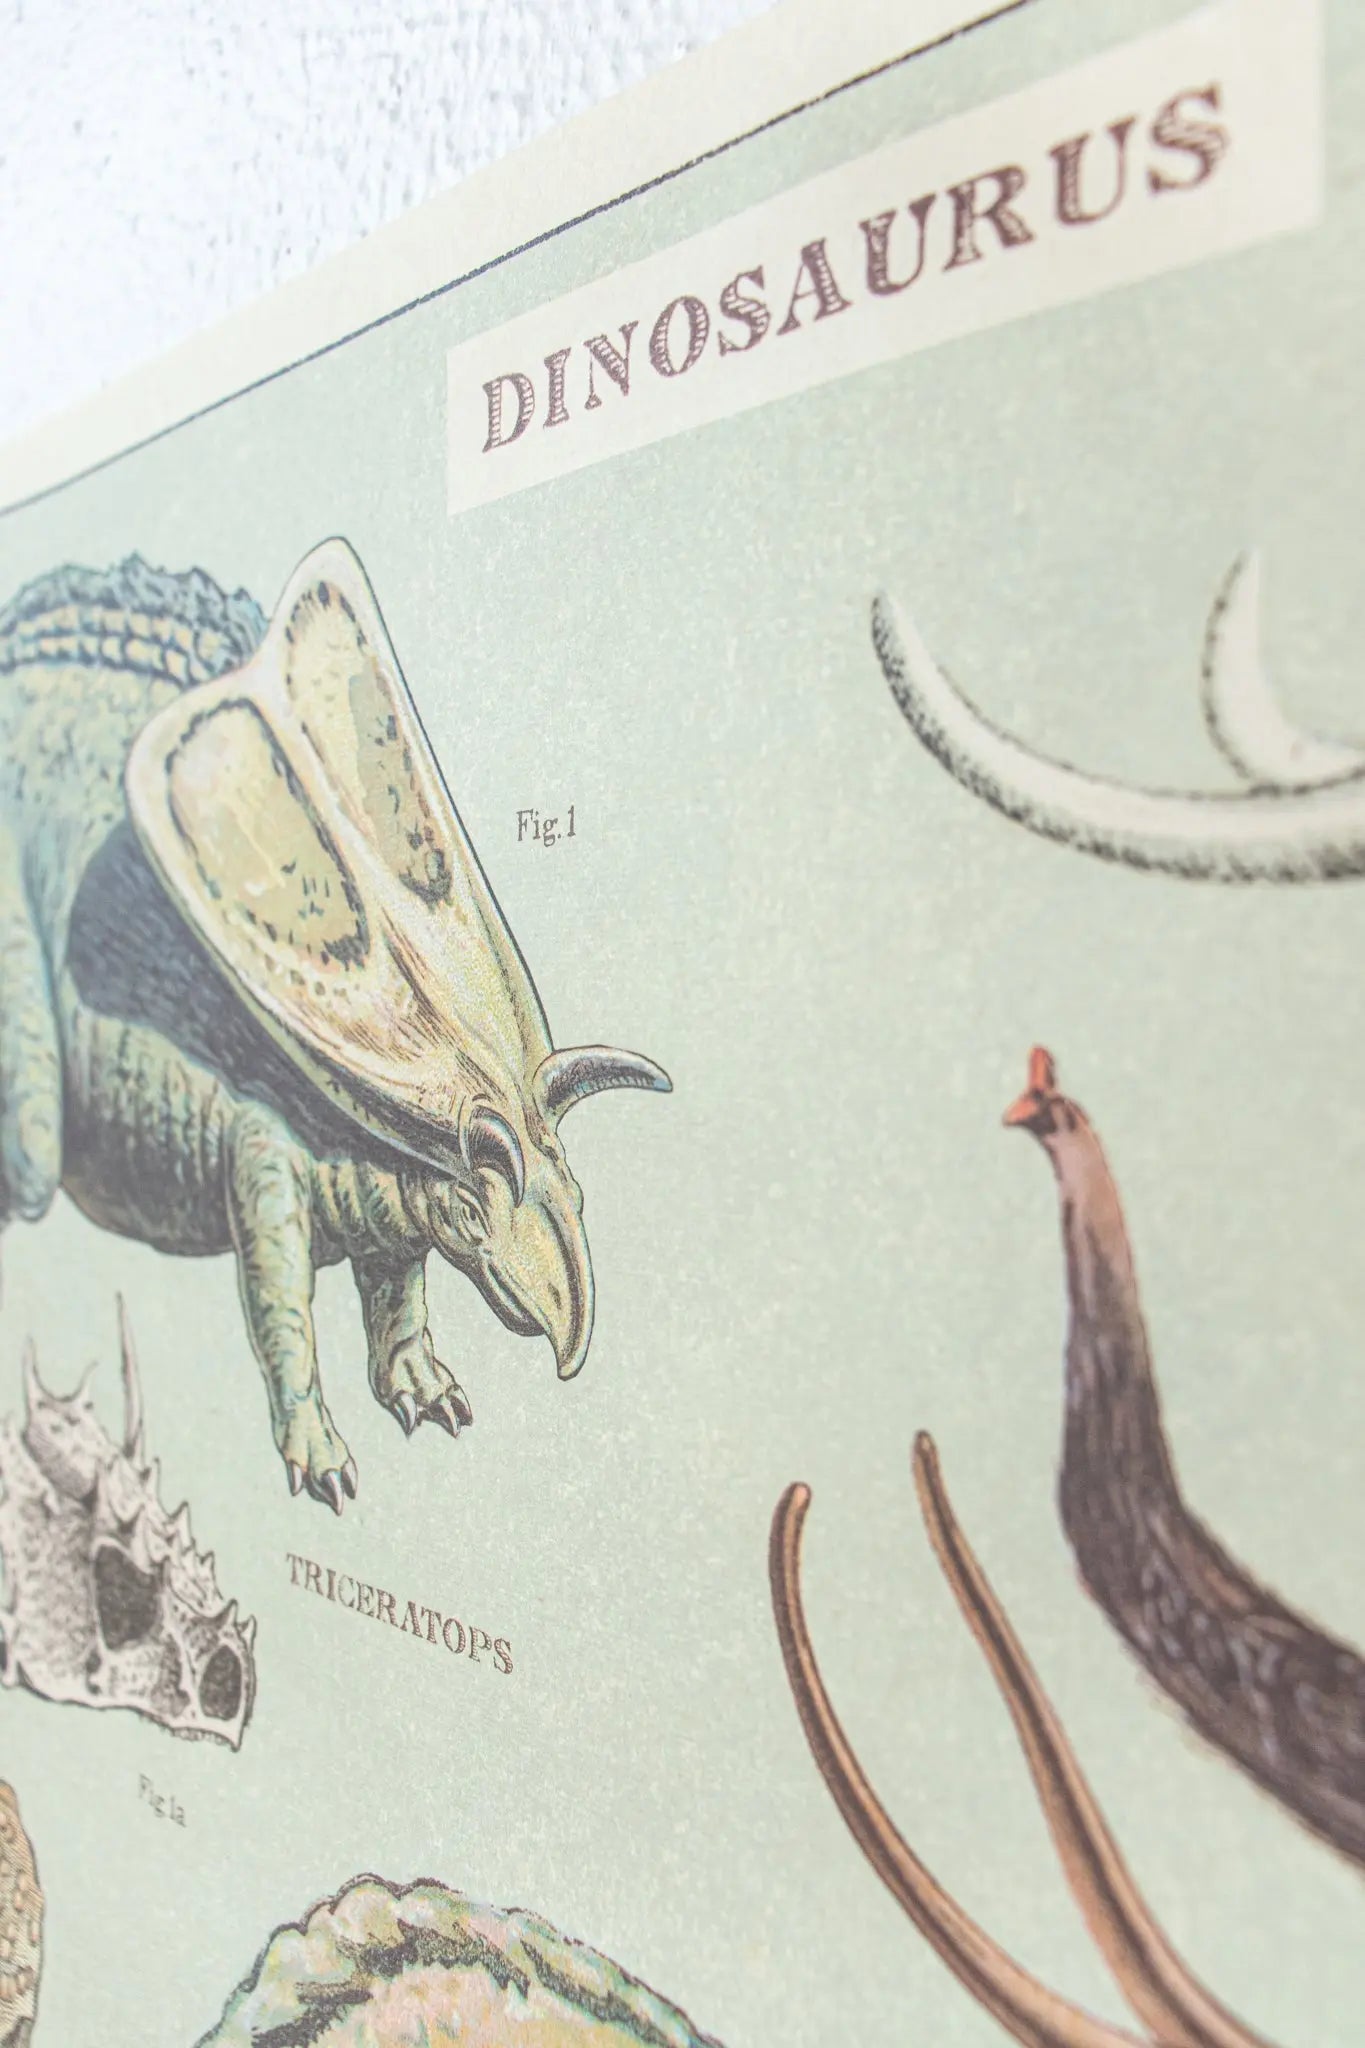 Dinosaurs Scientific Chart - Stemcell Science Shop